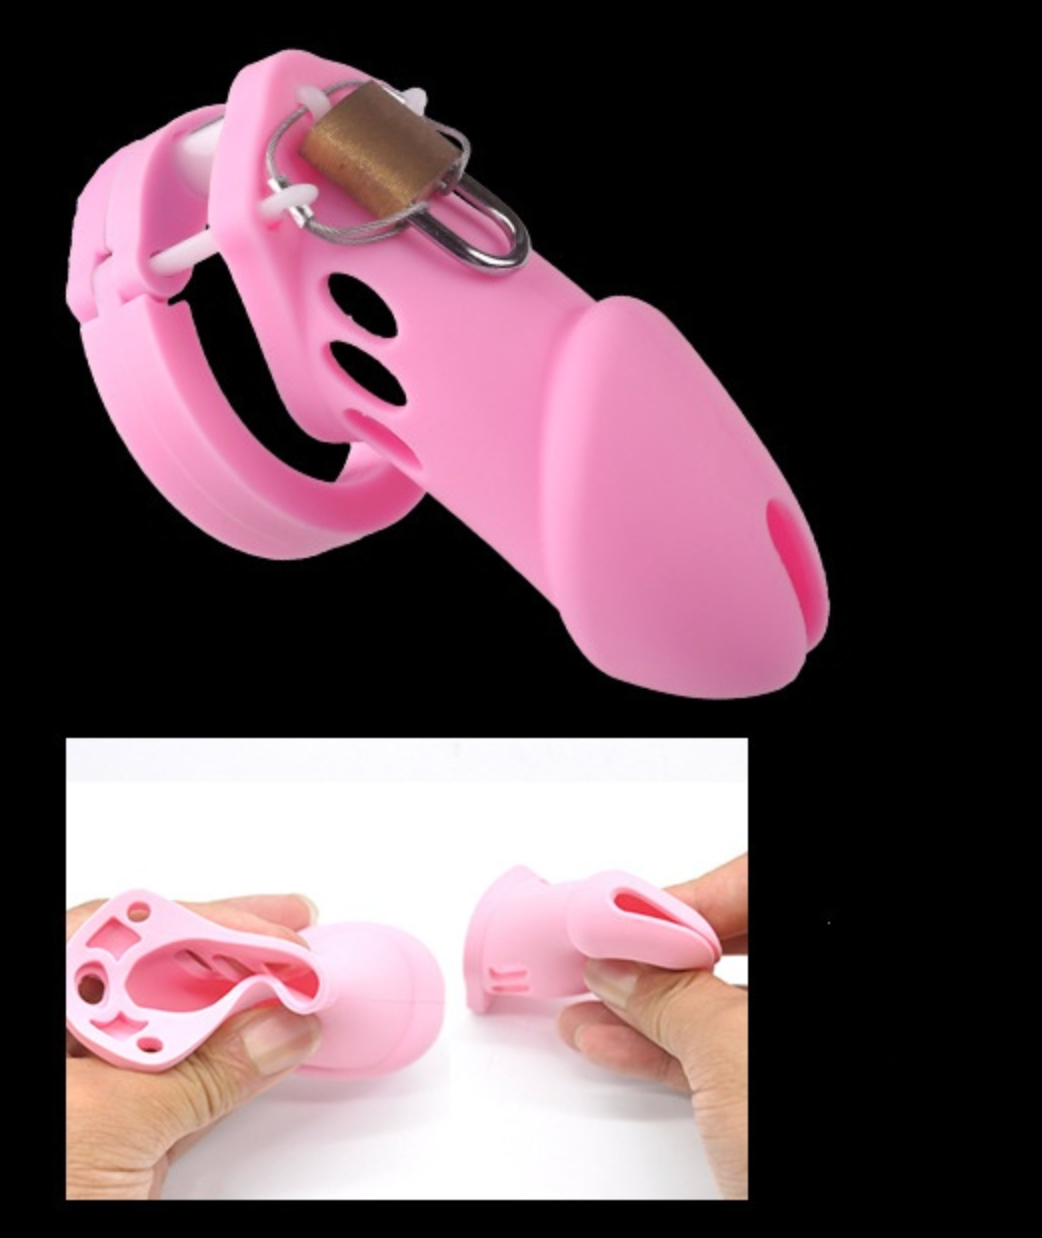 Soft Silicone Chastity Cage Set with 5 Penis Rings - Pink - KeepMeLocked